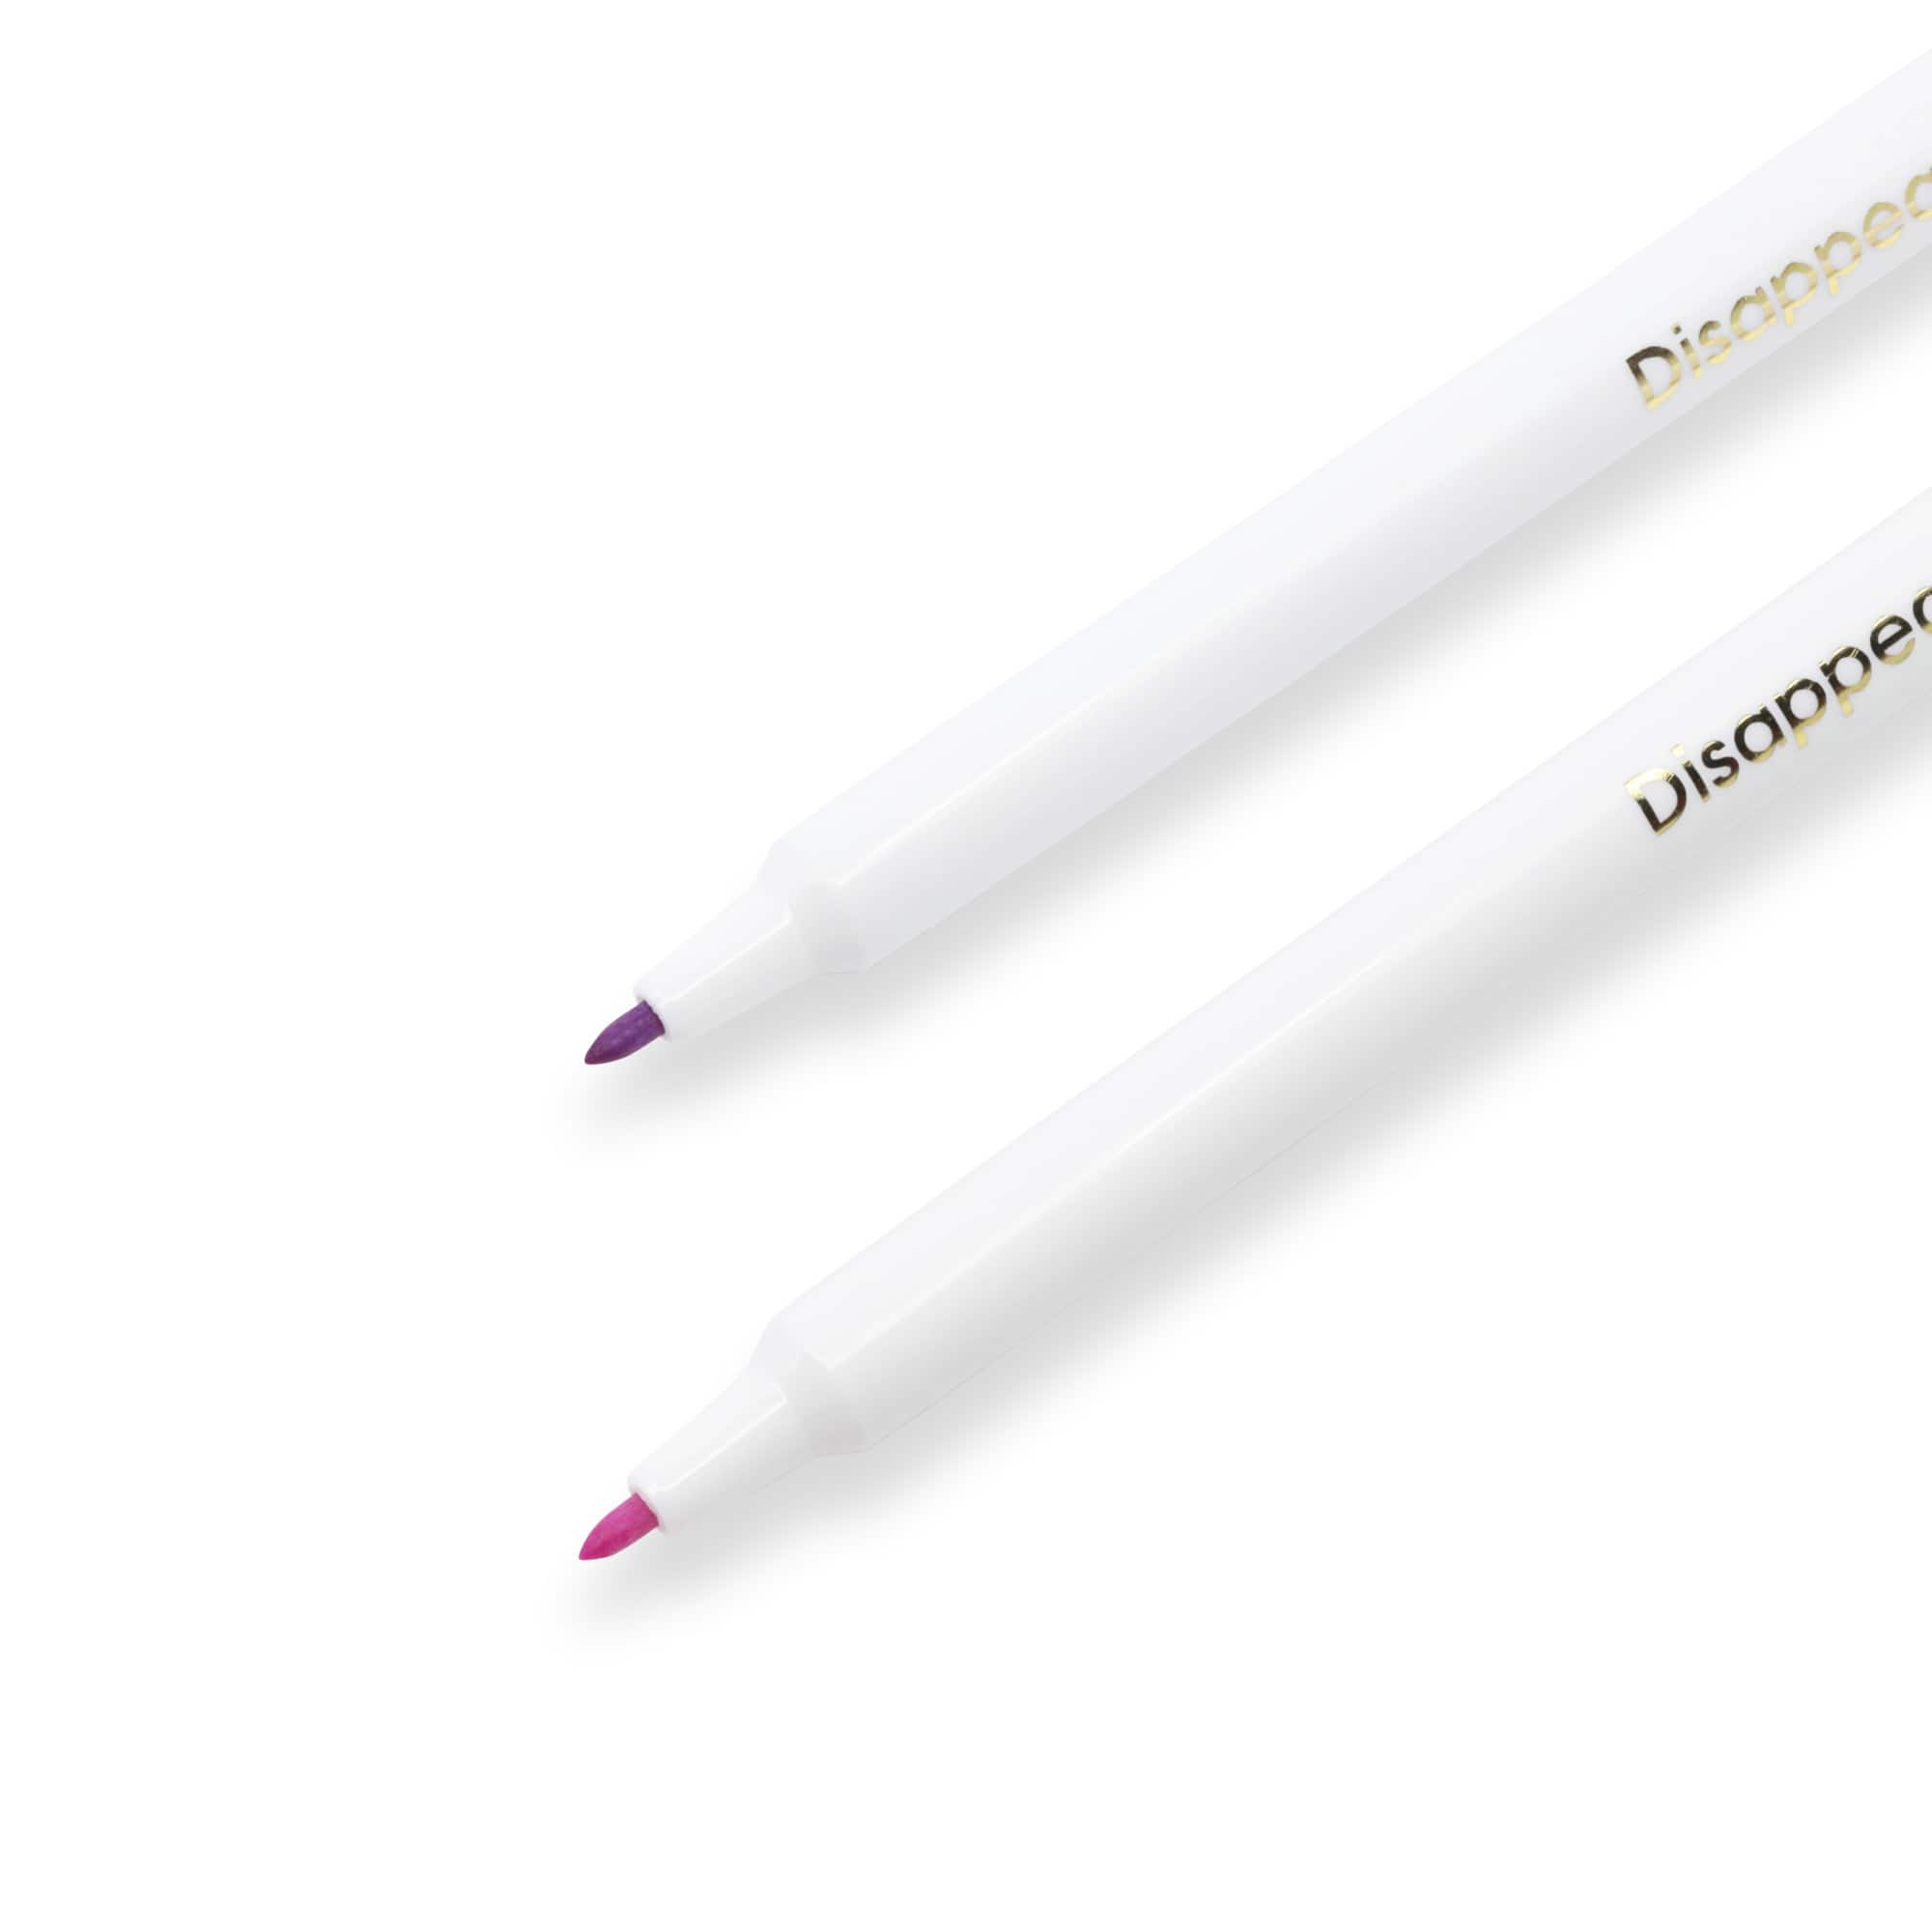 Loops & Threads™ Disappearing Ink Marking Pen, Michaels